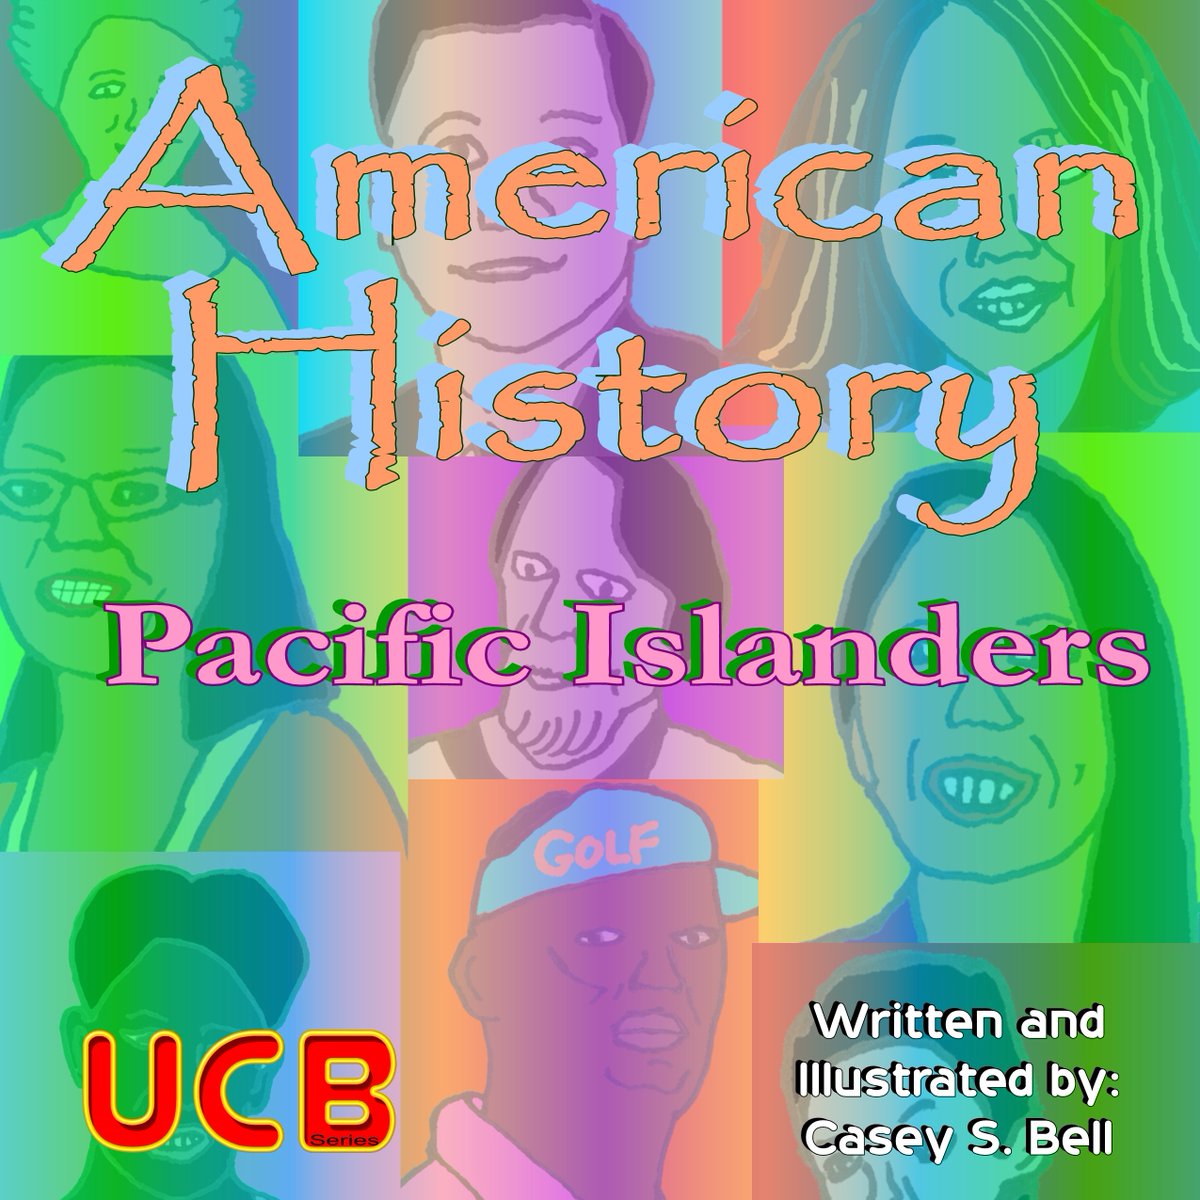 #asianpacificheritagemonth #asianpacificislander #asianpacificheritage #childrensbooks #americanhistory #bookworms

authorcaseybell.com/americanhistor…
American History is a Children's Book Series which includes American  inventors and innovators who have contributed to America's history.